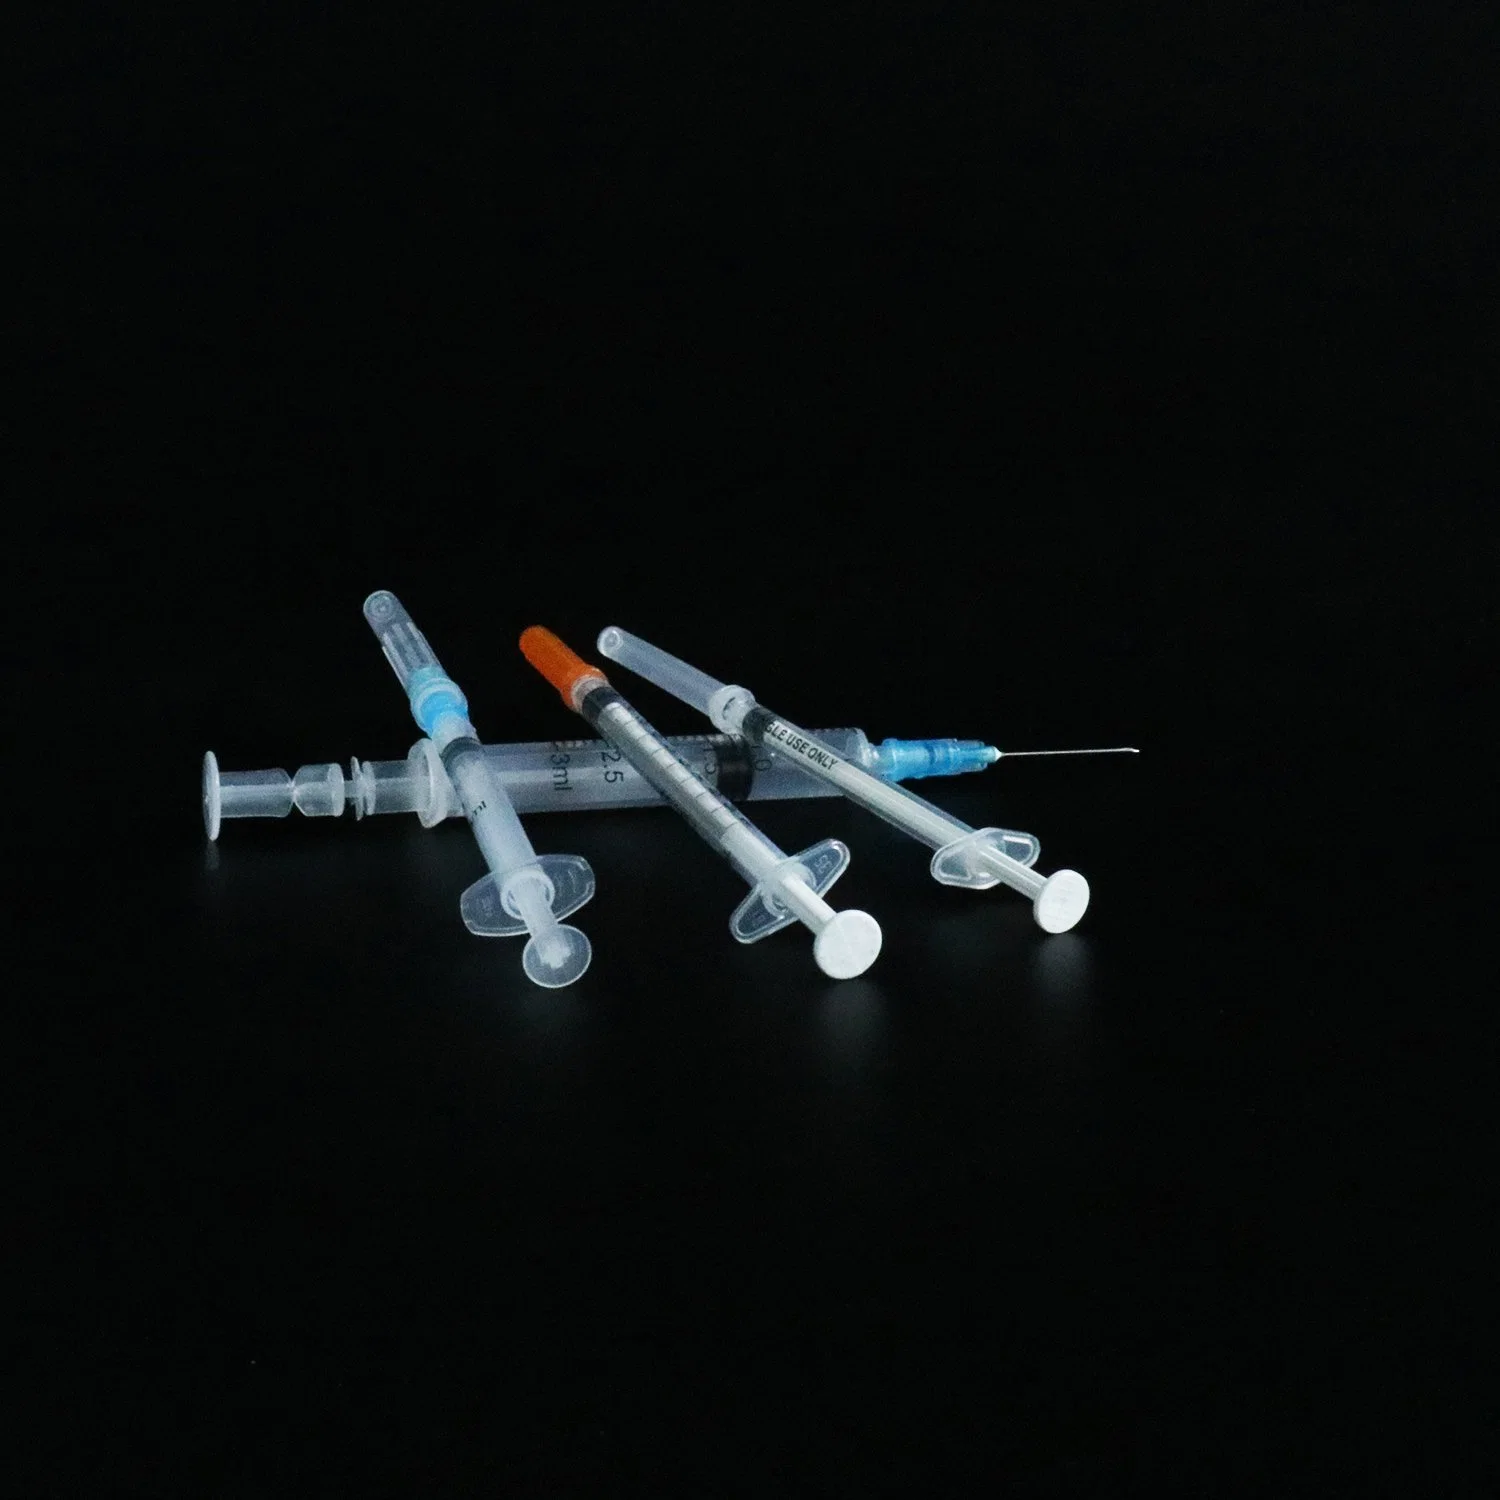 Siny Medical Supplies Disposable Safety Injection Sterile Syringe Vaccine (стерильная шпри Шприц